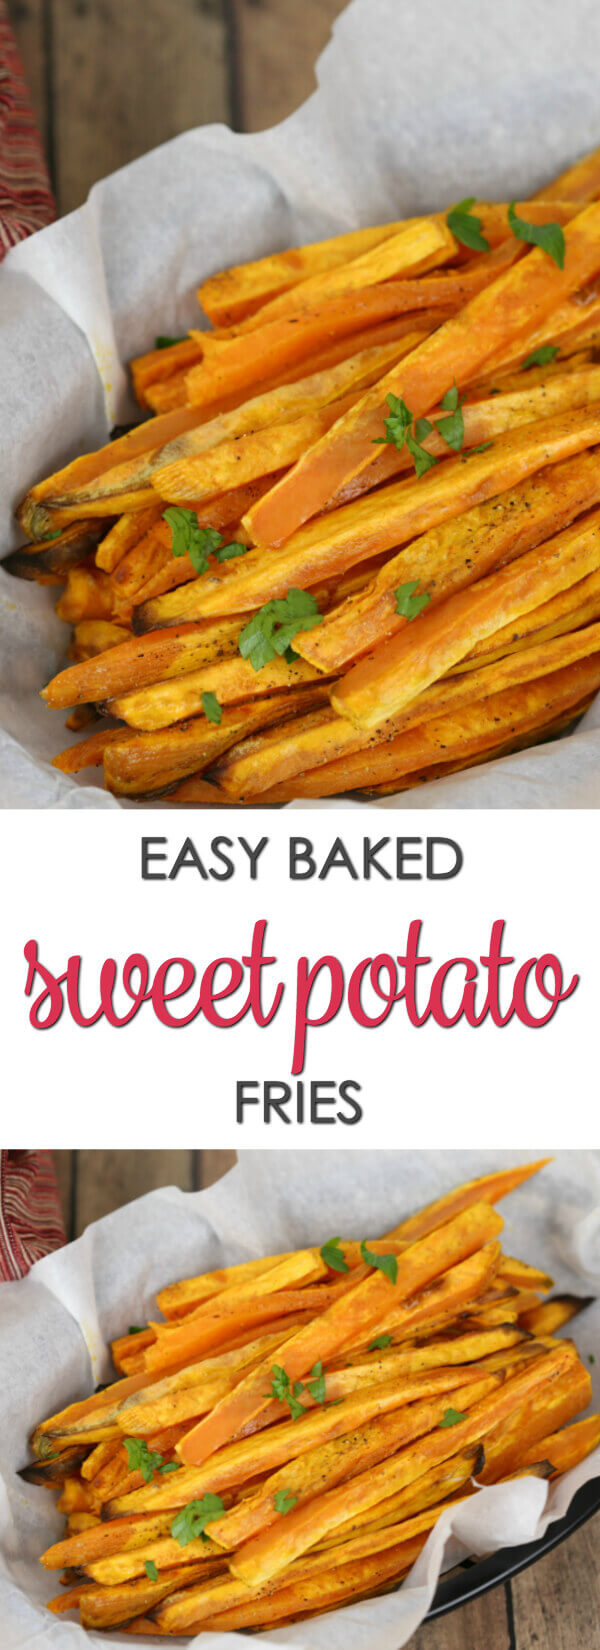 These Sweet Potato Baked Fries are a quick and easy easy side dish that can be made in the oven